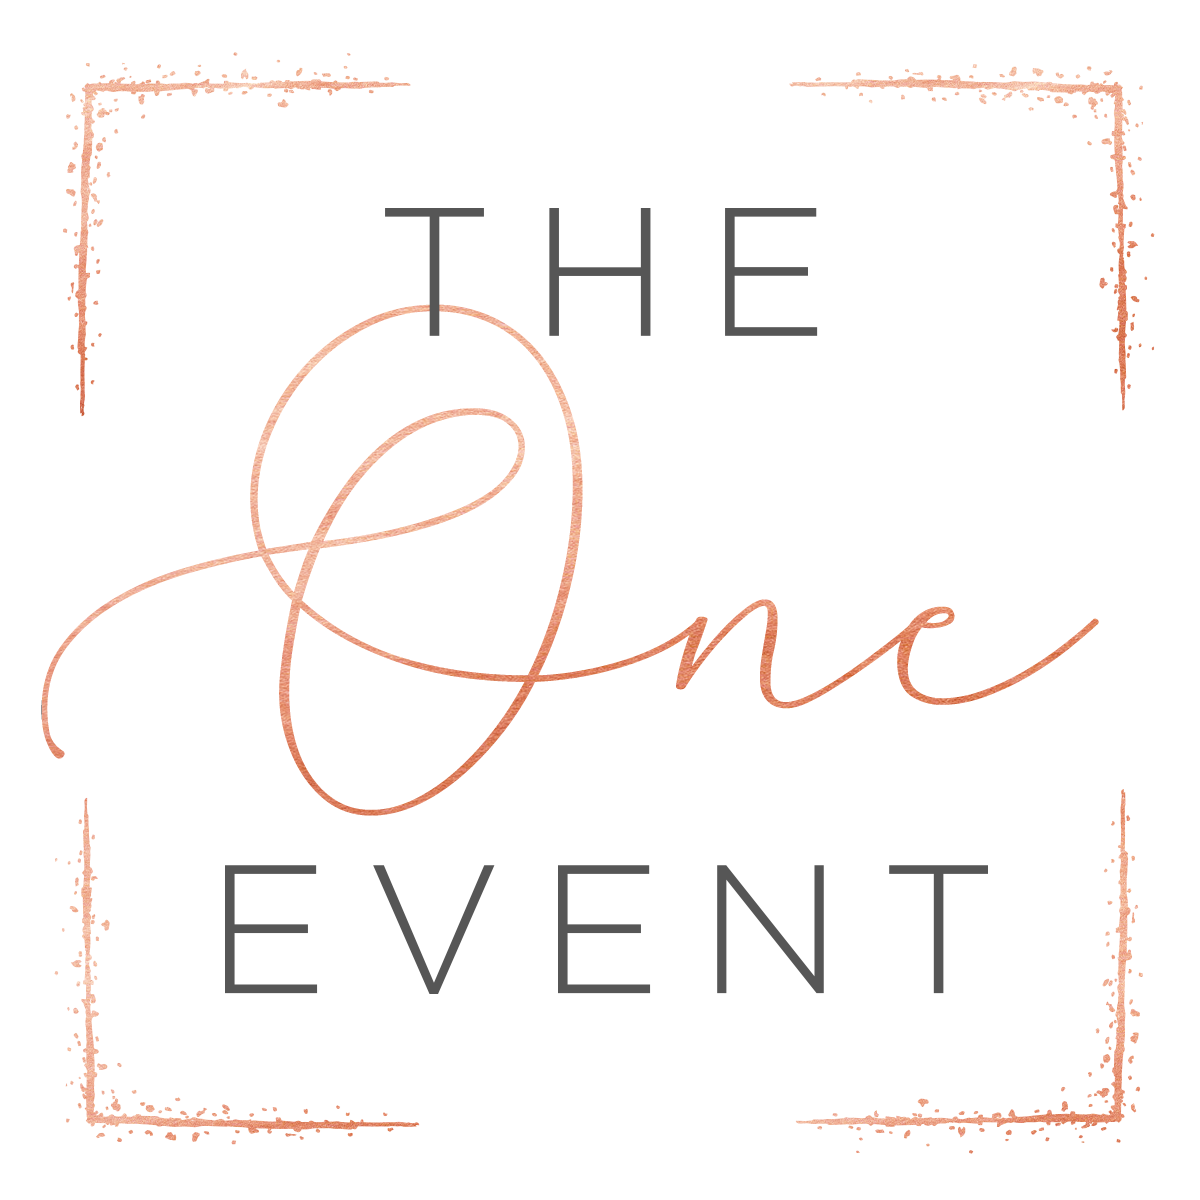 The One Event